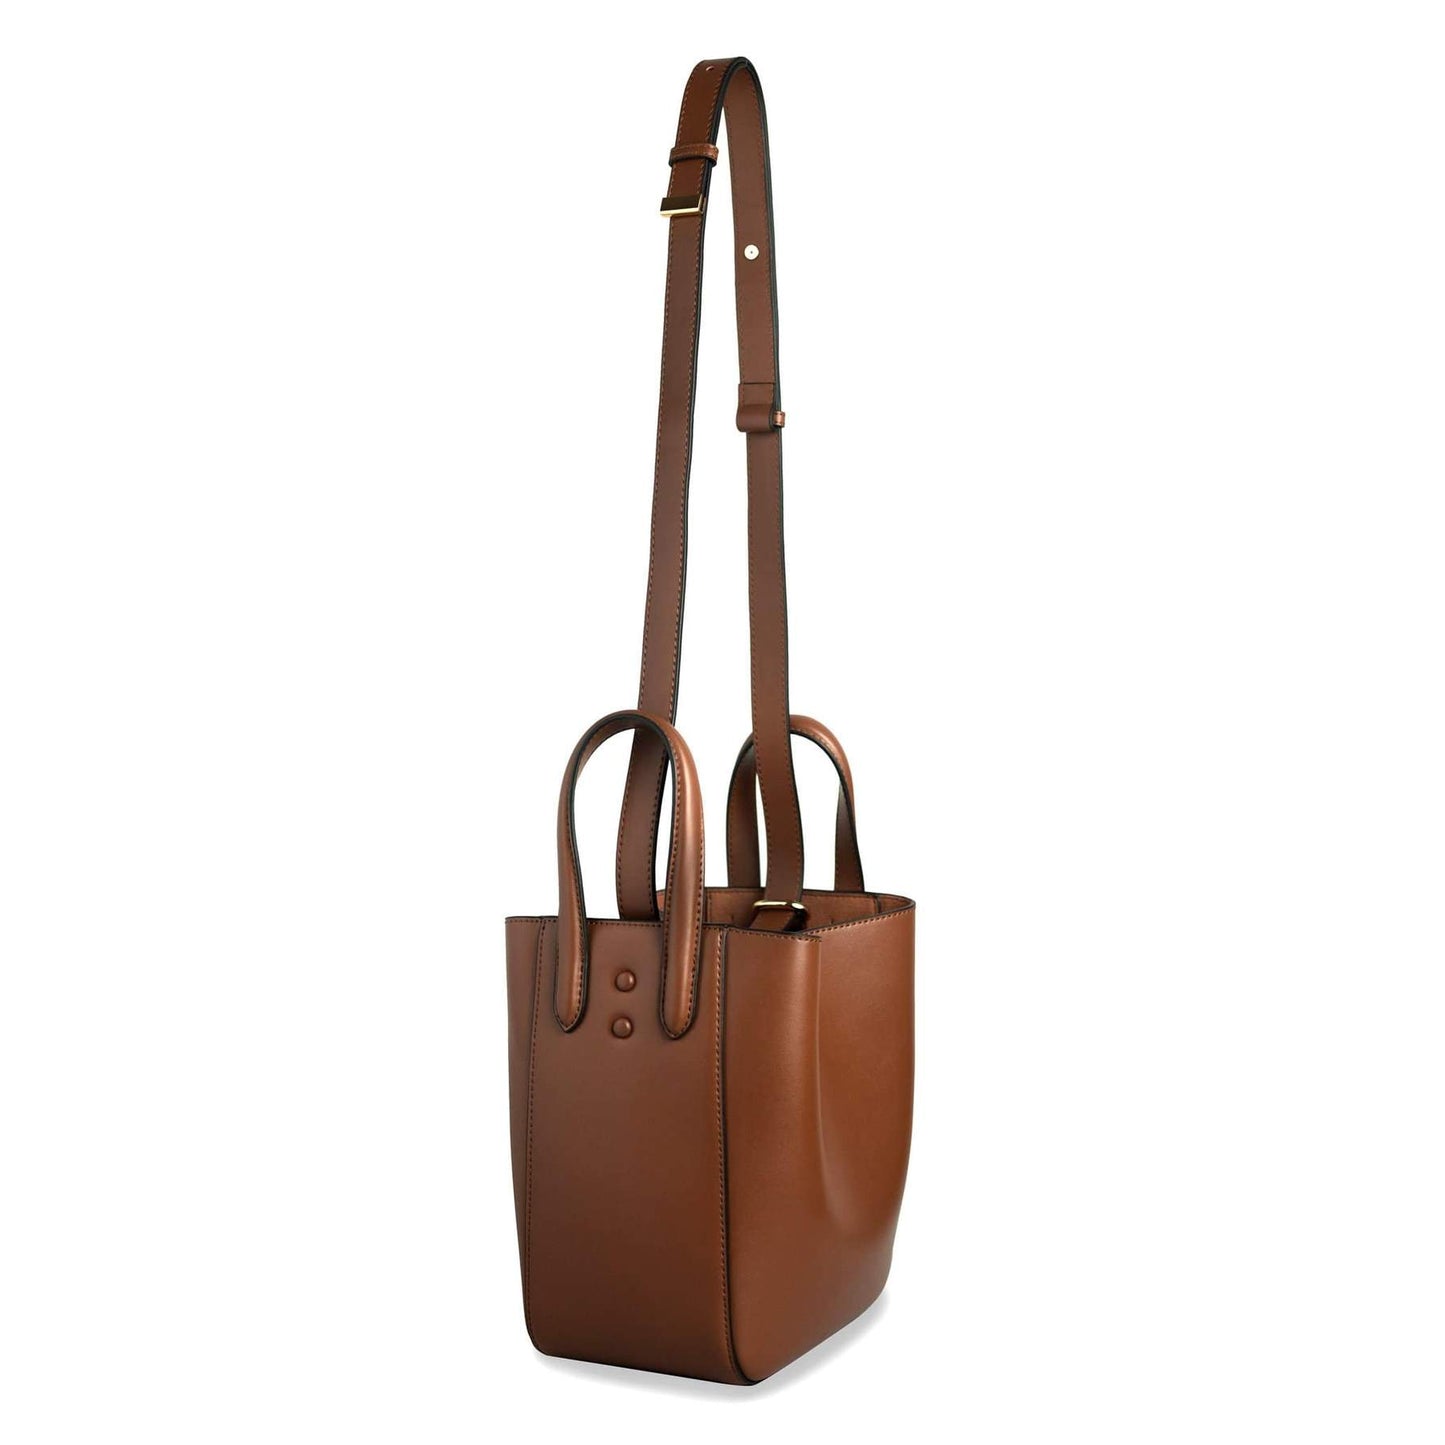 X NIHILO - EIGHT MINI TOTE BUCKET BAG - TAN Side view with strap lifted